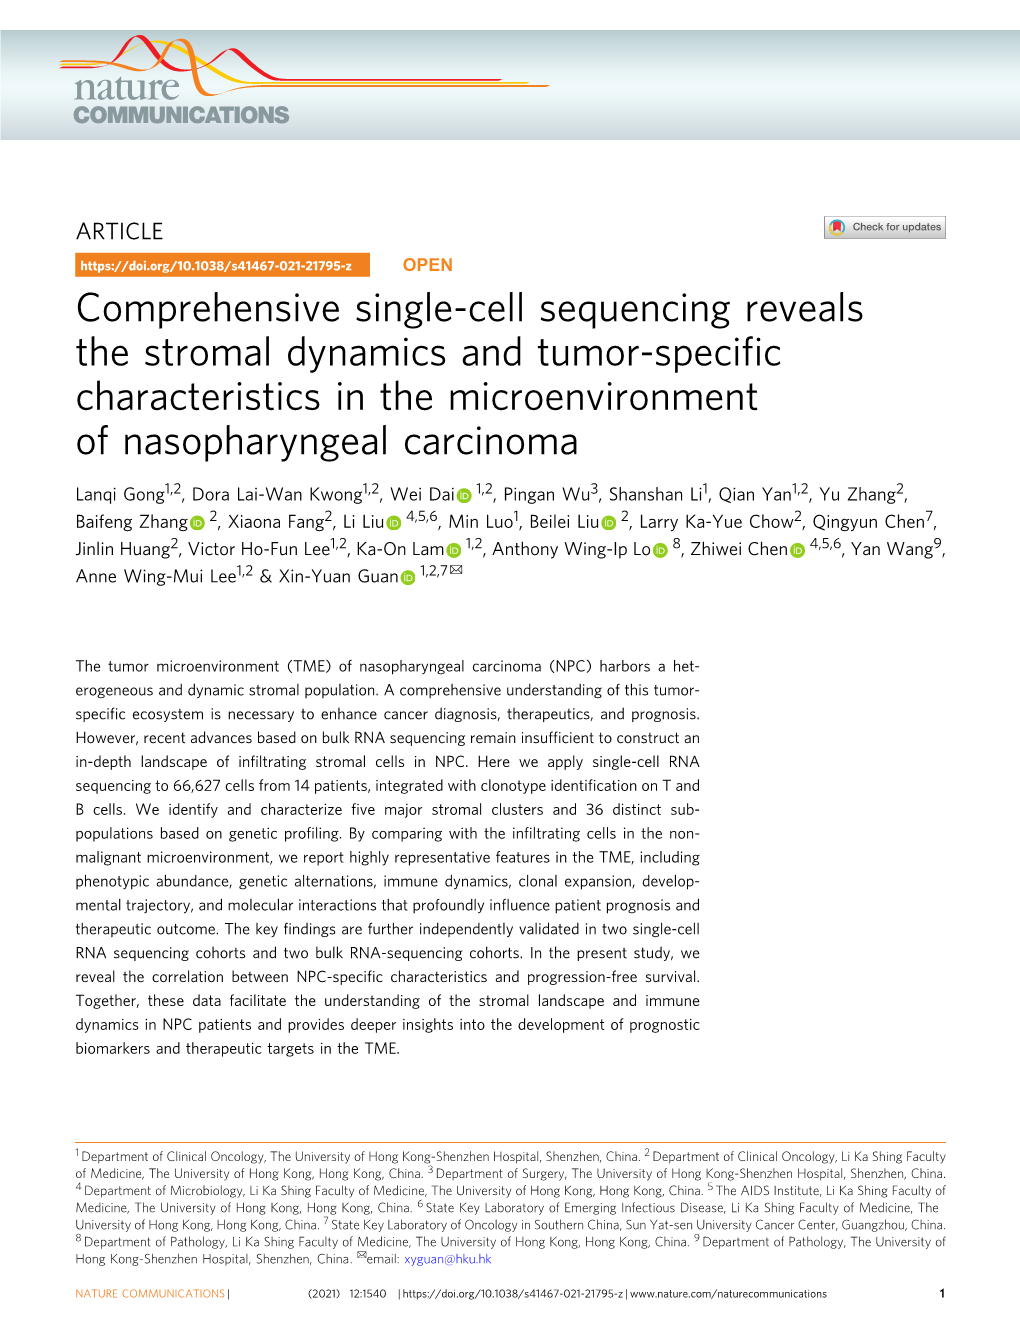 Comprehensive Single-Cell Sequencing Reveals the Stromal Dynamics and Tumor-Speciﬁc Characteristics in the Microenvironment of Nasopharyngeal Carcinoma